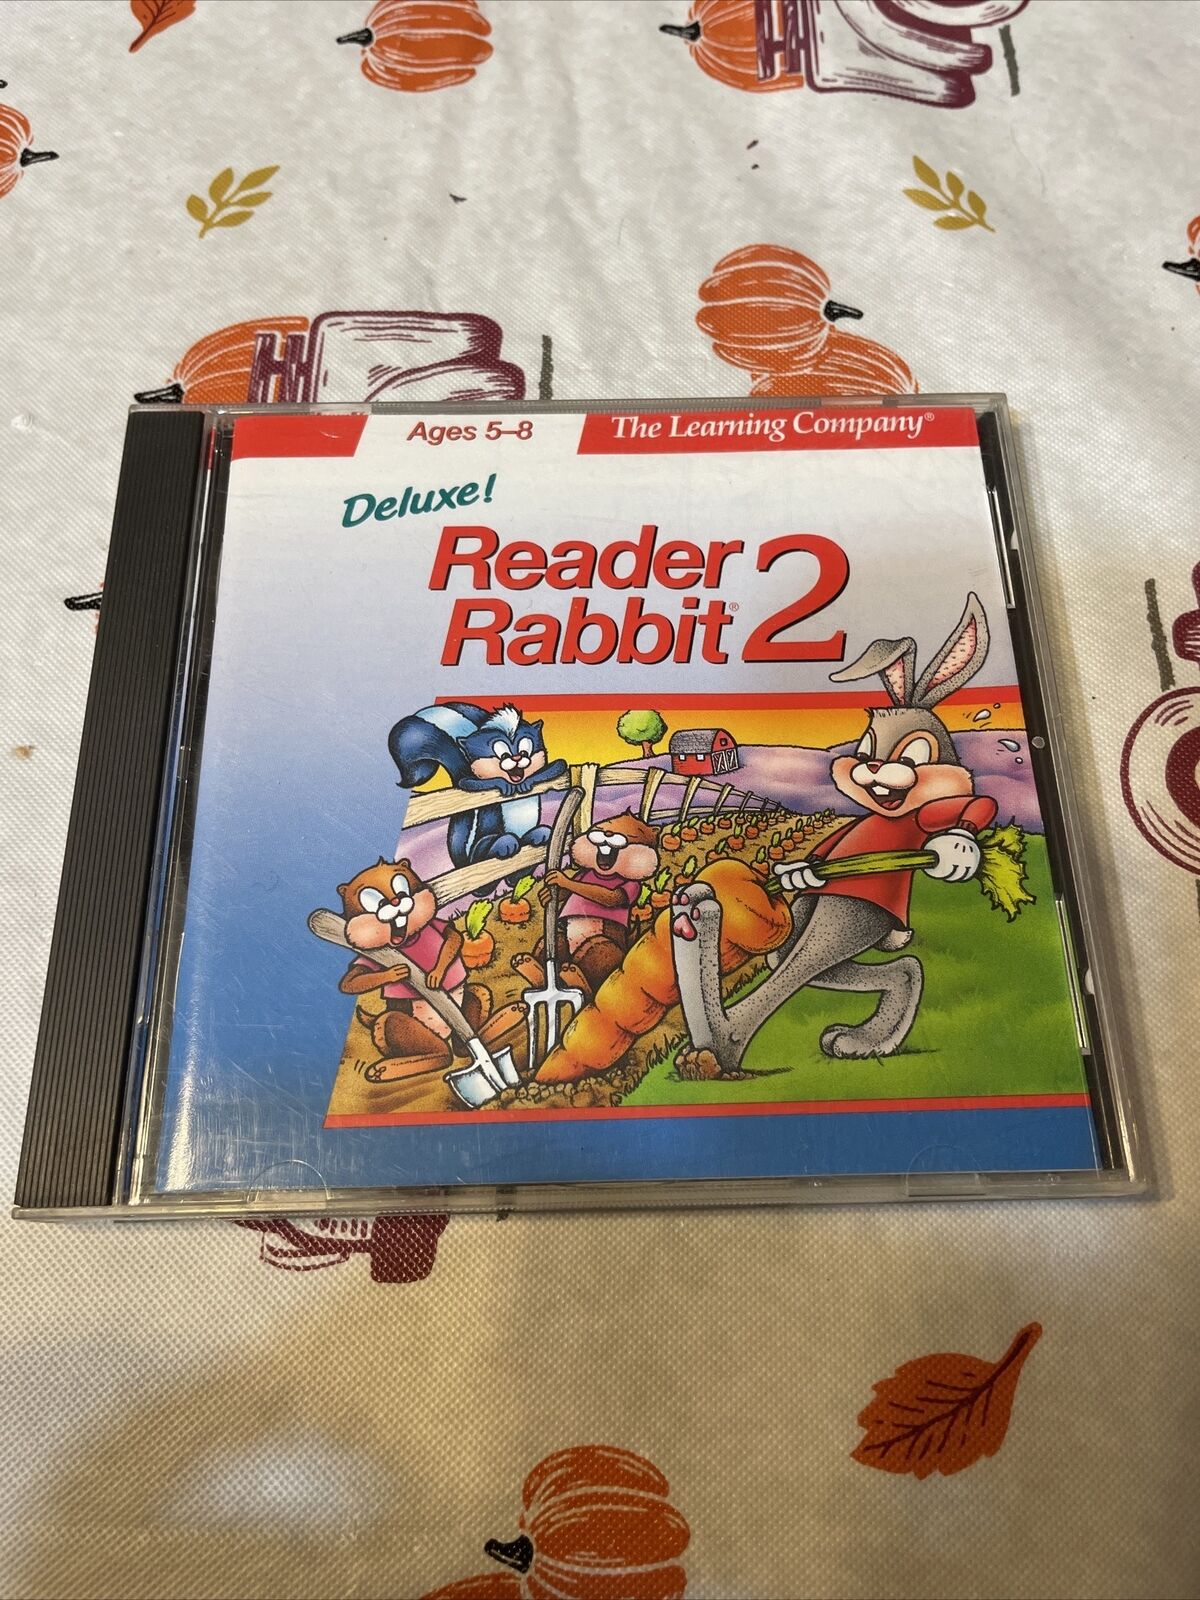 Reader Rabbit 2 Deluxe The Learning Company Ages 5-8